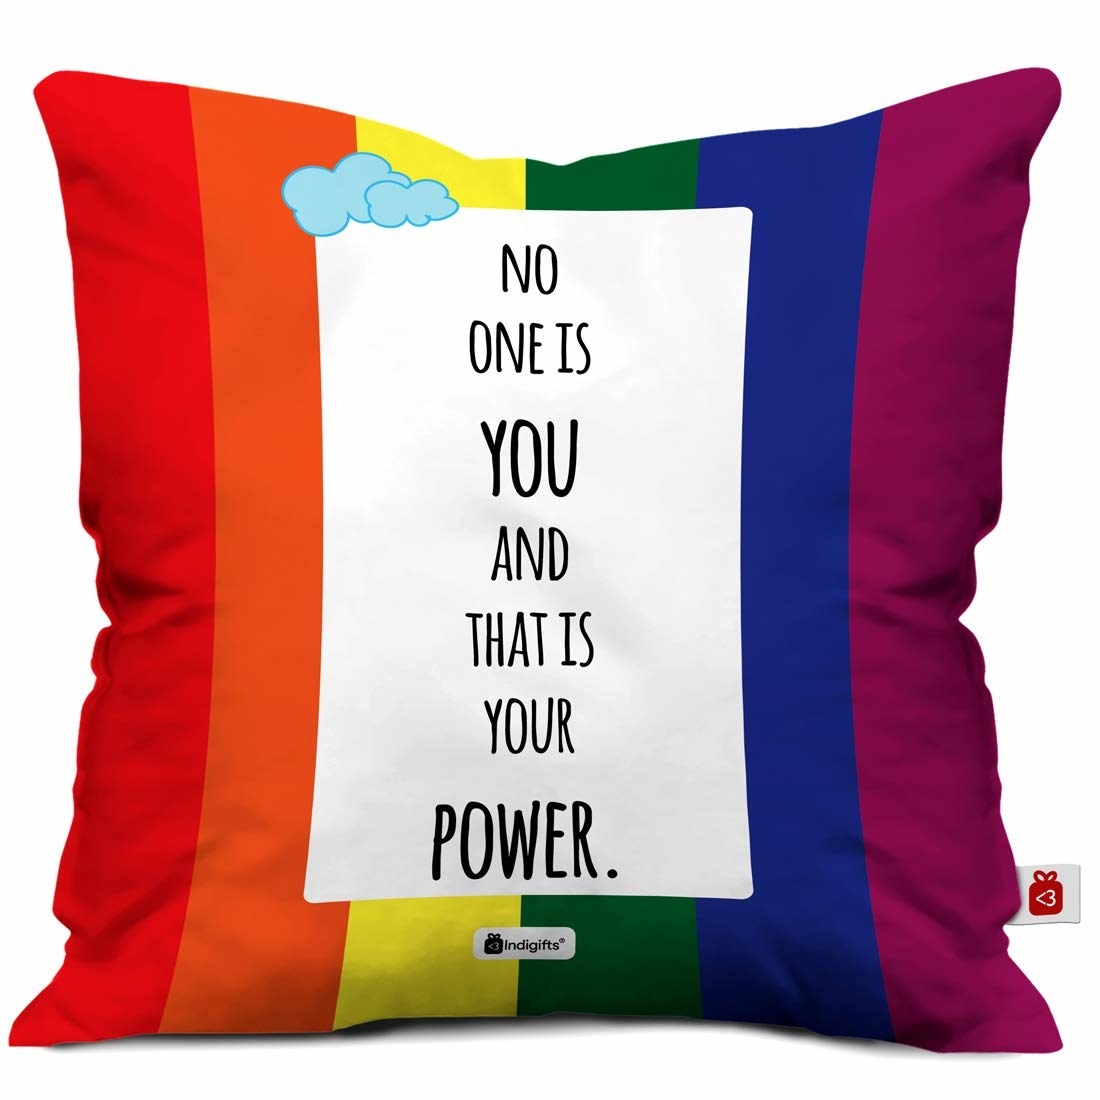 A Rainbow pillow that says &#x27;No one is you and that is your power&#x27;